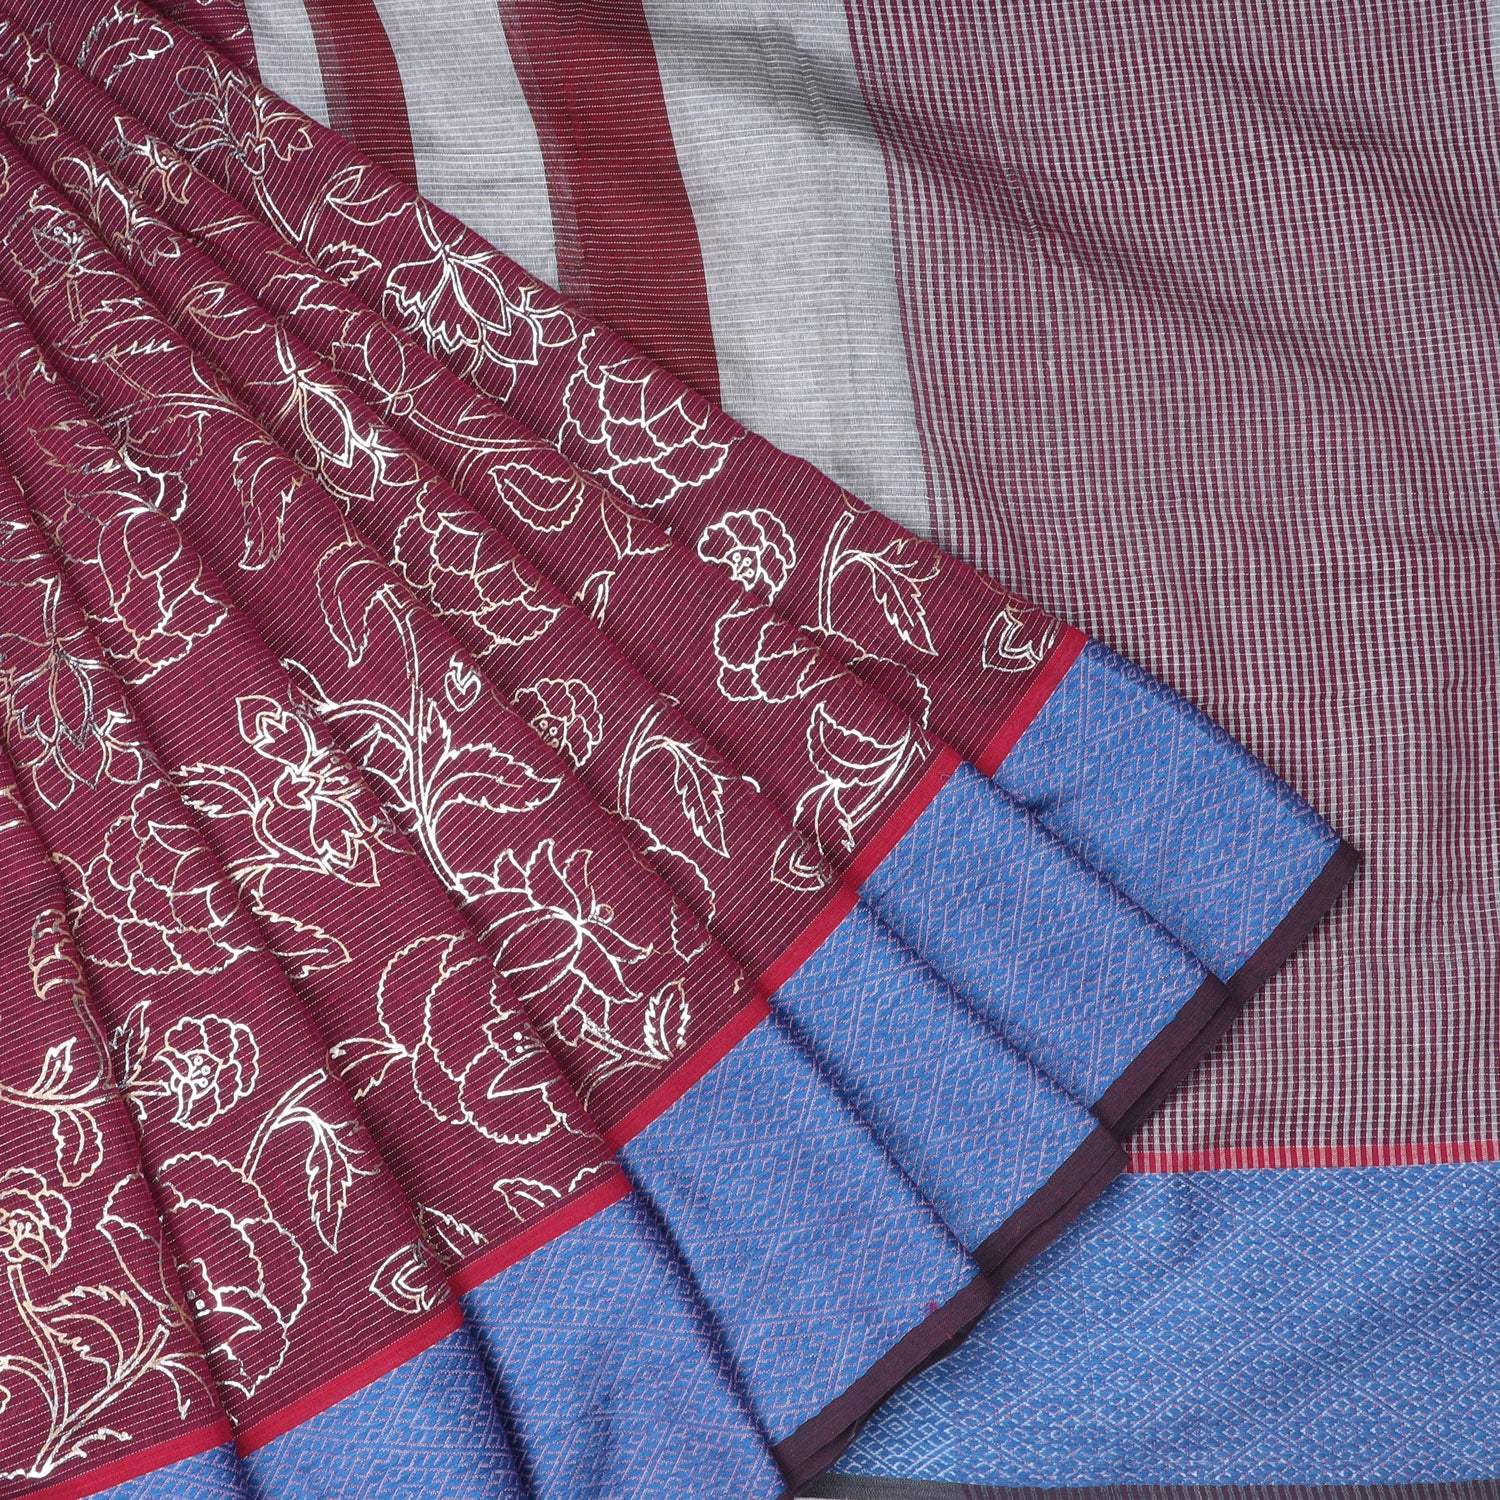 Brick Red Cotton Saree With Foil Printed Motifs